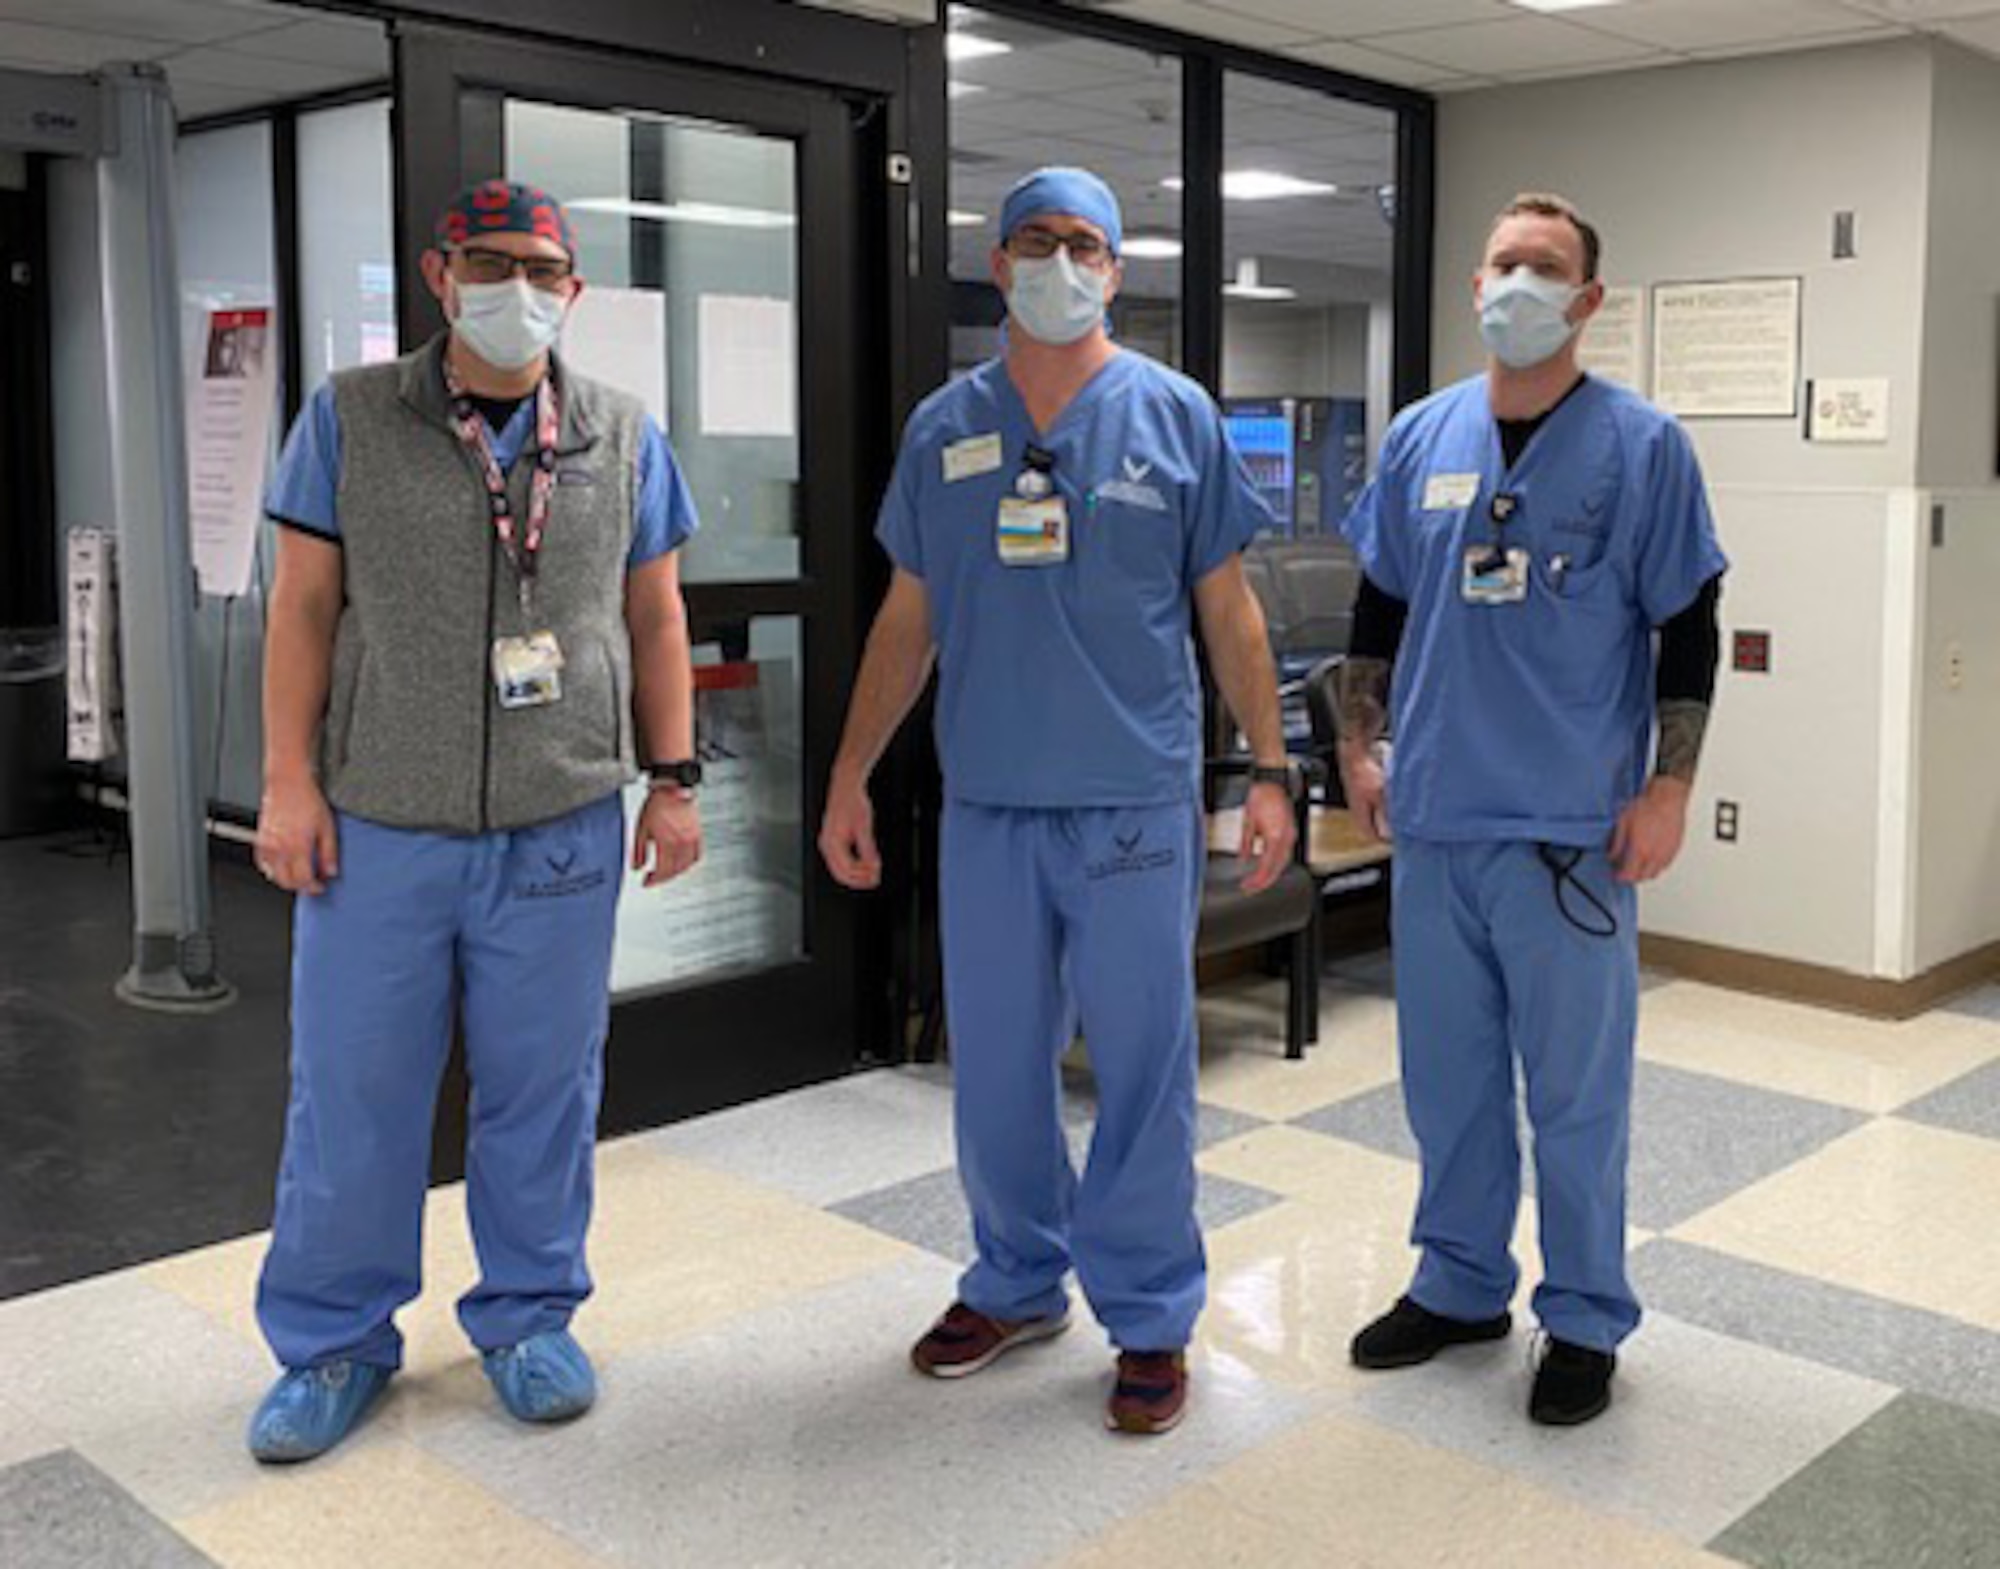 Health care workers at the Vanderbilt University Medical Center in Nashville, Tennessee, wearing scrubs that were donated two weeks ago by recruiters from Air Force Recruiting Service. The donation of these Air Force Health Professions scrubs was led by Staff Sgt. Brandon McKeever, 342nd Recruiting Squadron, B-Flight. (Courtesy photo)